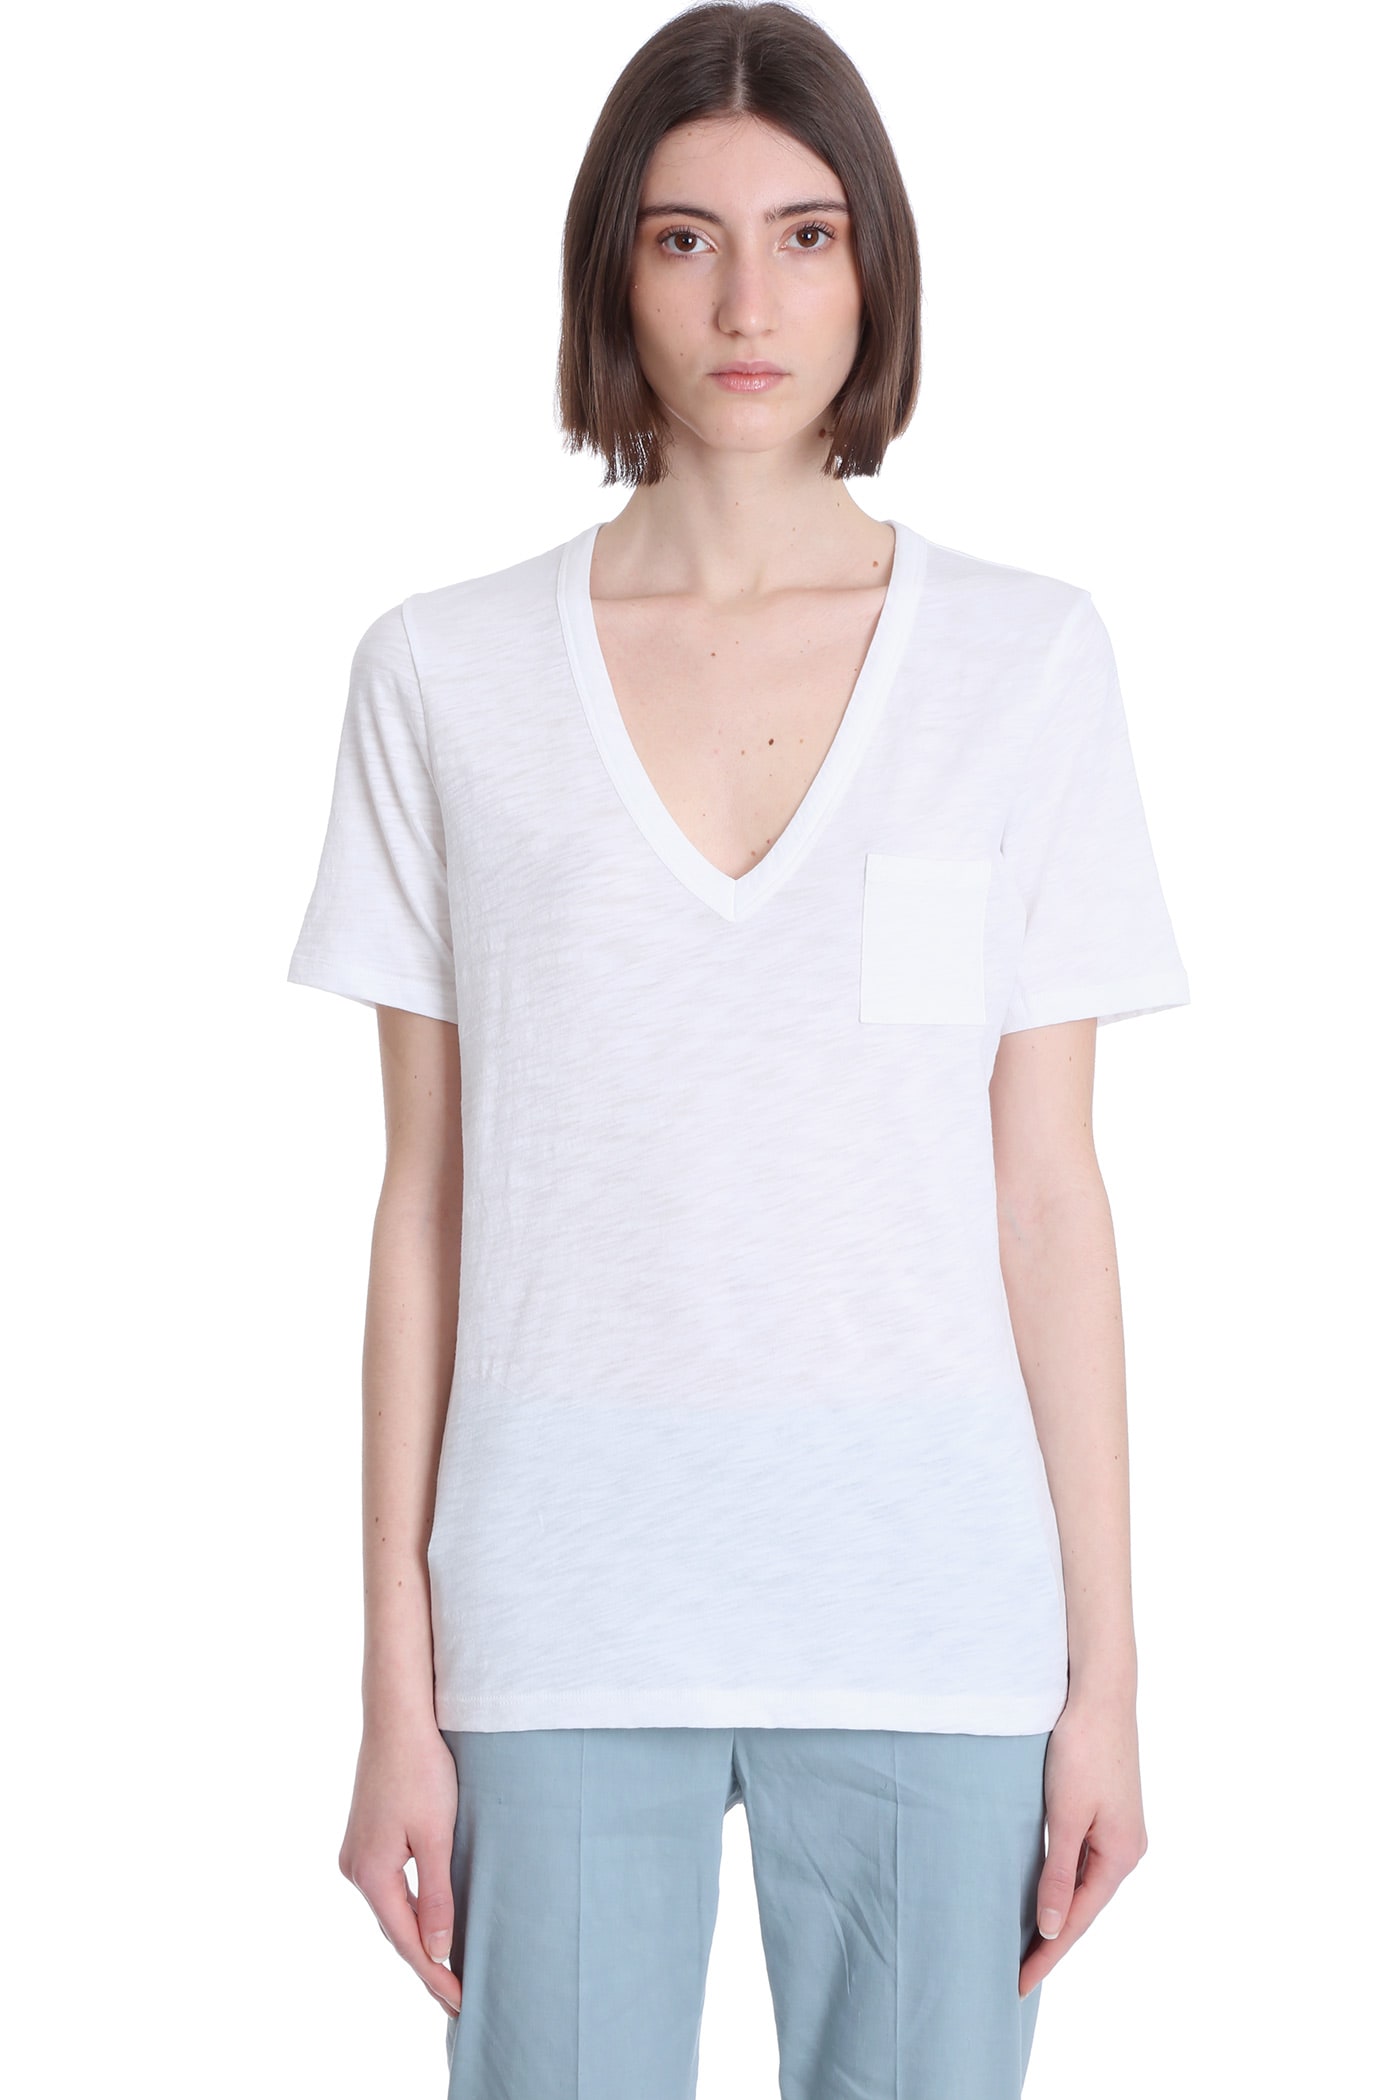 THEORY T-SHIRT IN WHITE COTTON,11861136